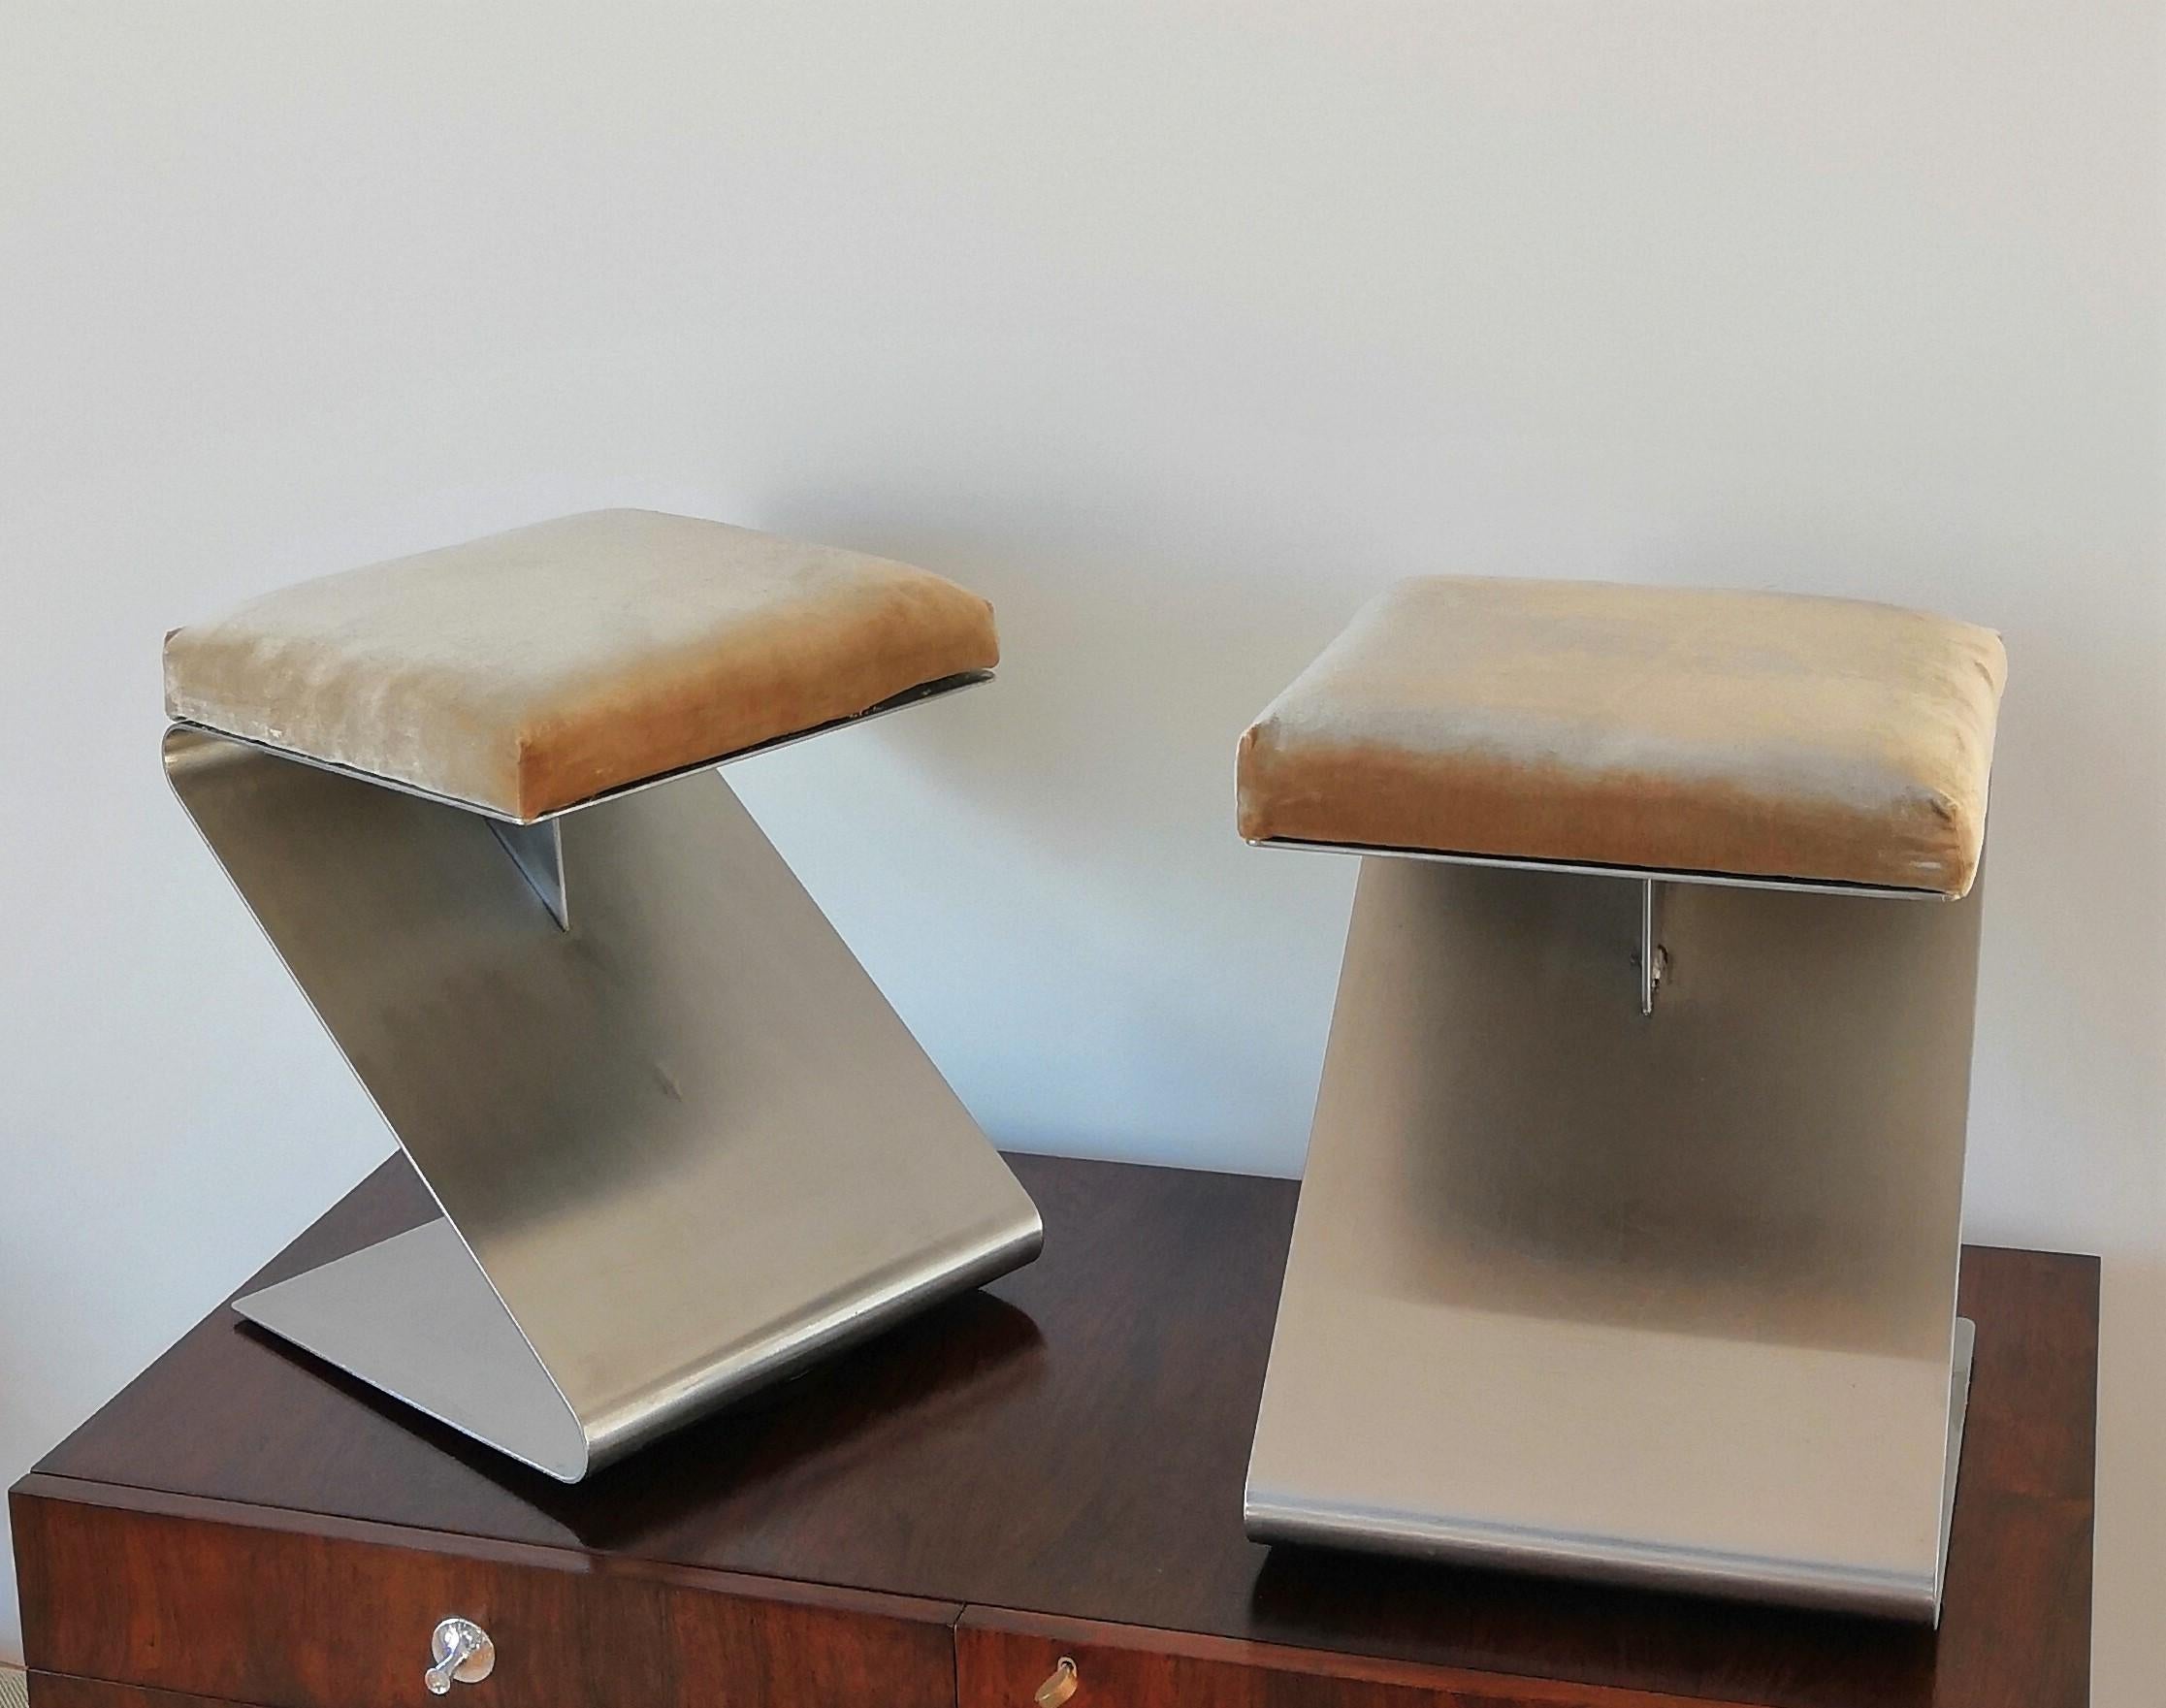 Stainless steel stool
in the style of Kappa
New upholstery, silk and cotton velvet
stools can be returned to either Paris France or 200 Lexington avenue NY, USA
Surface scratches 
      